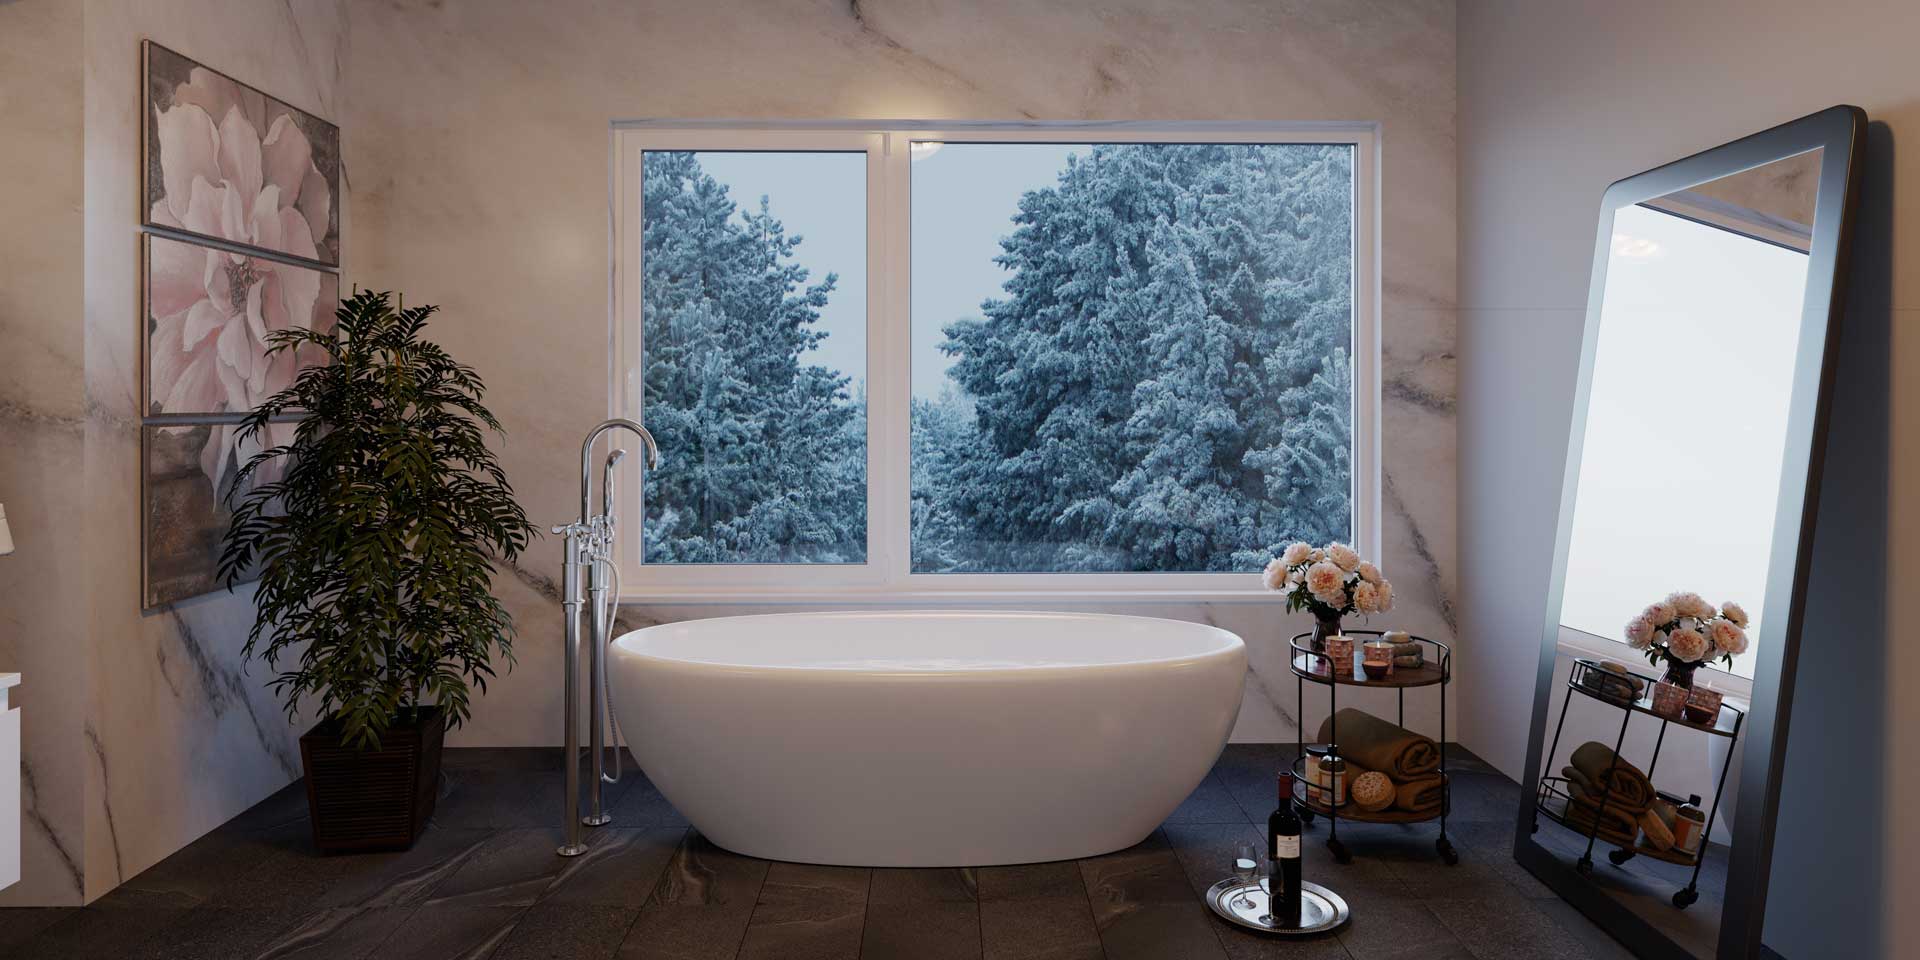 Modern bathroom with big picture window looking to snow trees